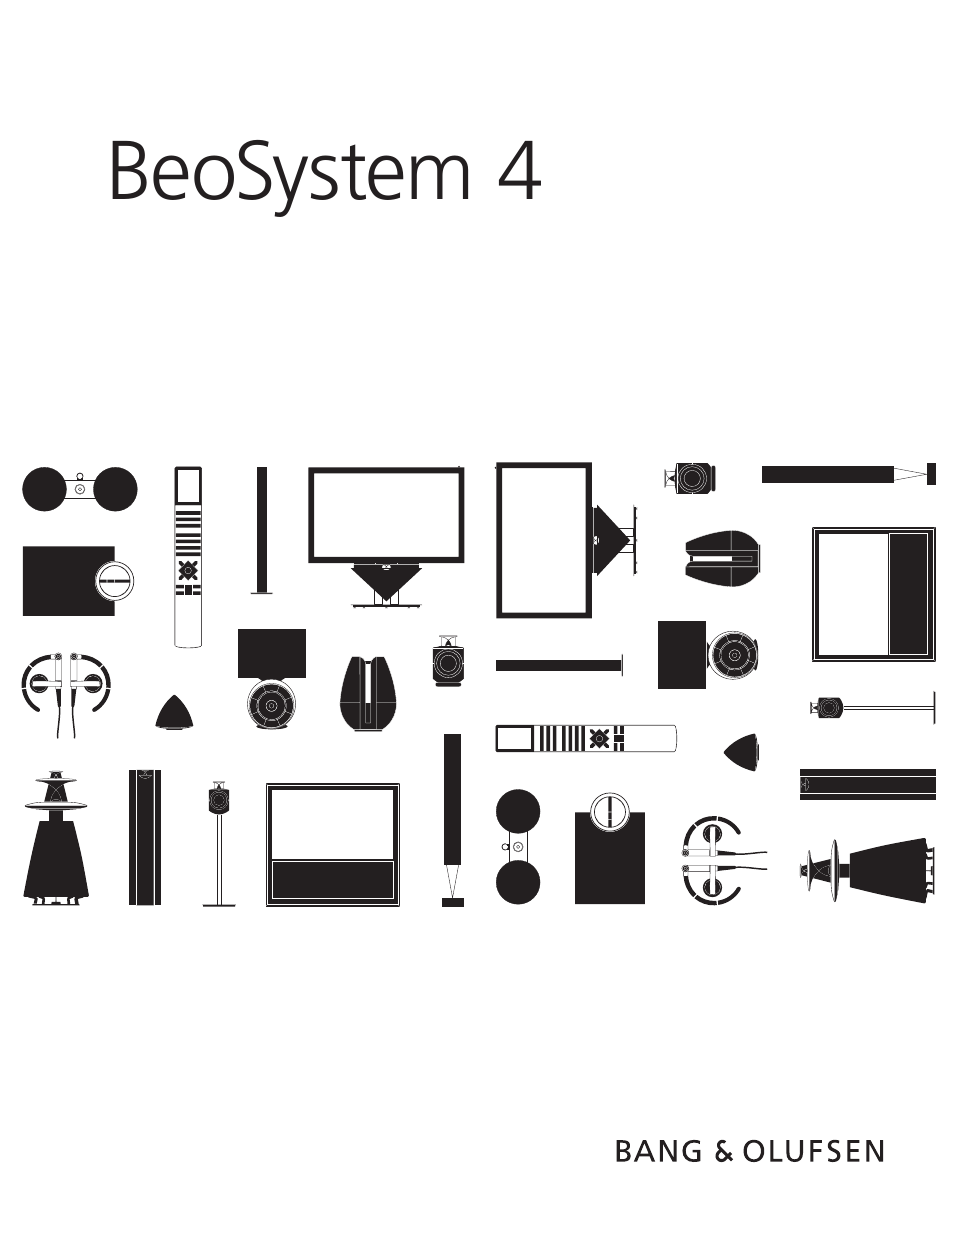 BeoSystem 4 with Beo4 Getting Started (No tuner)